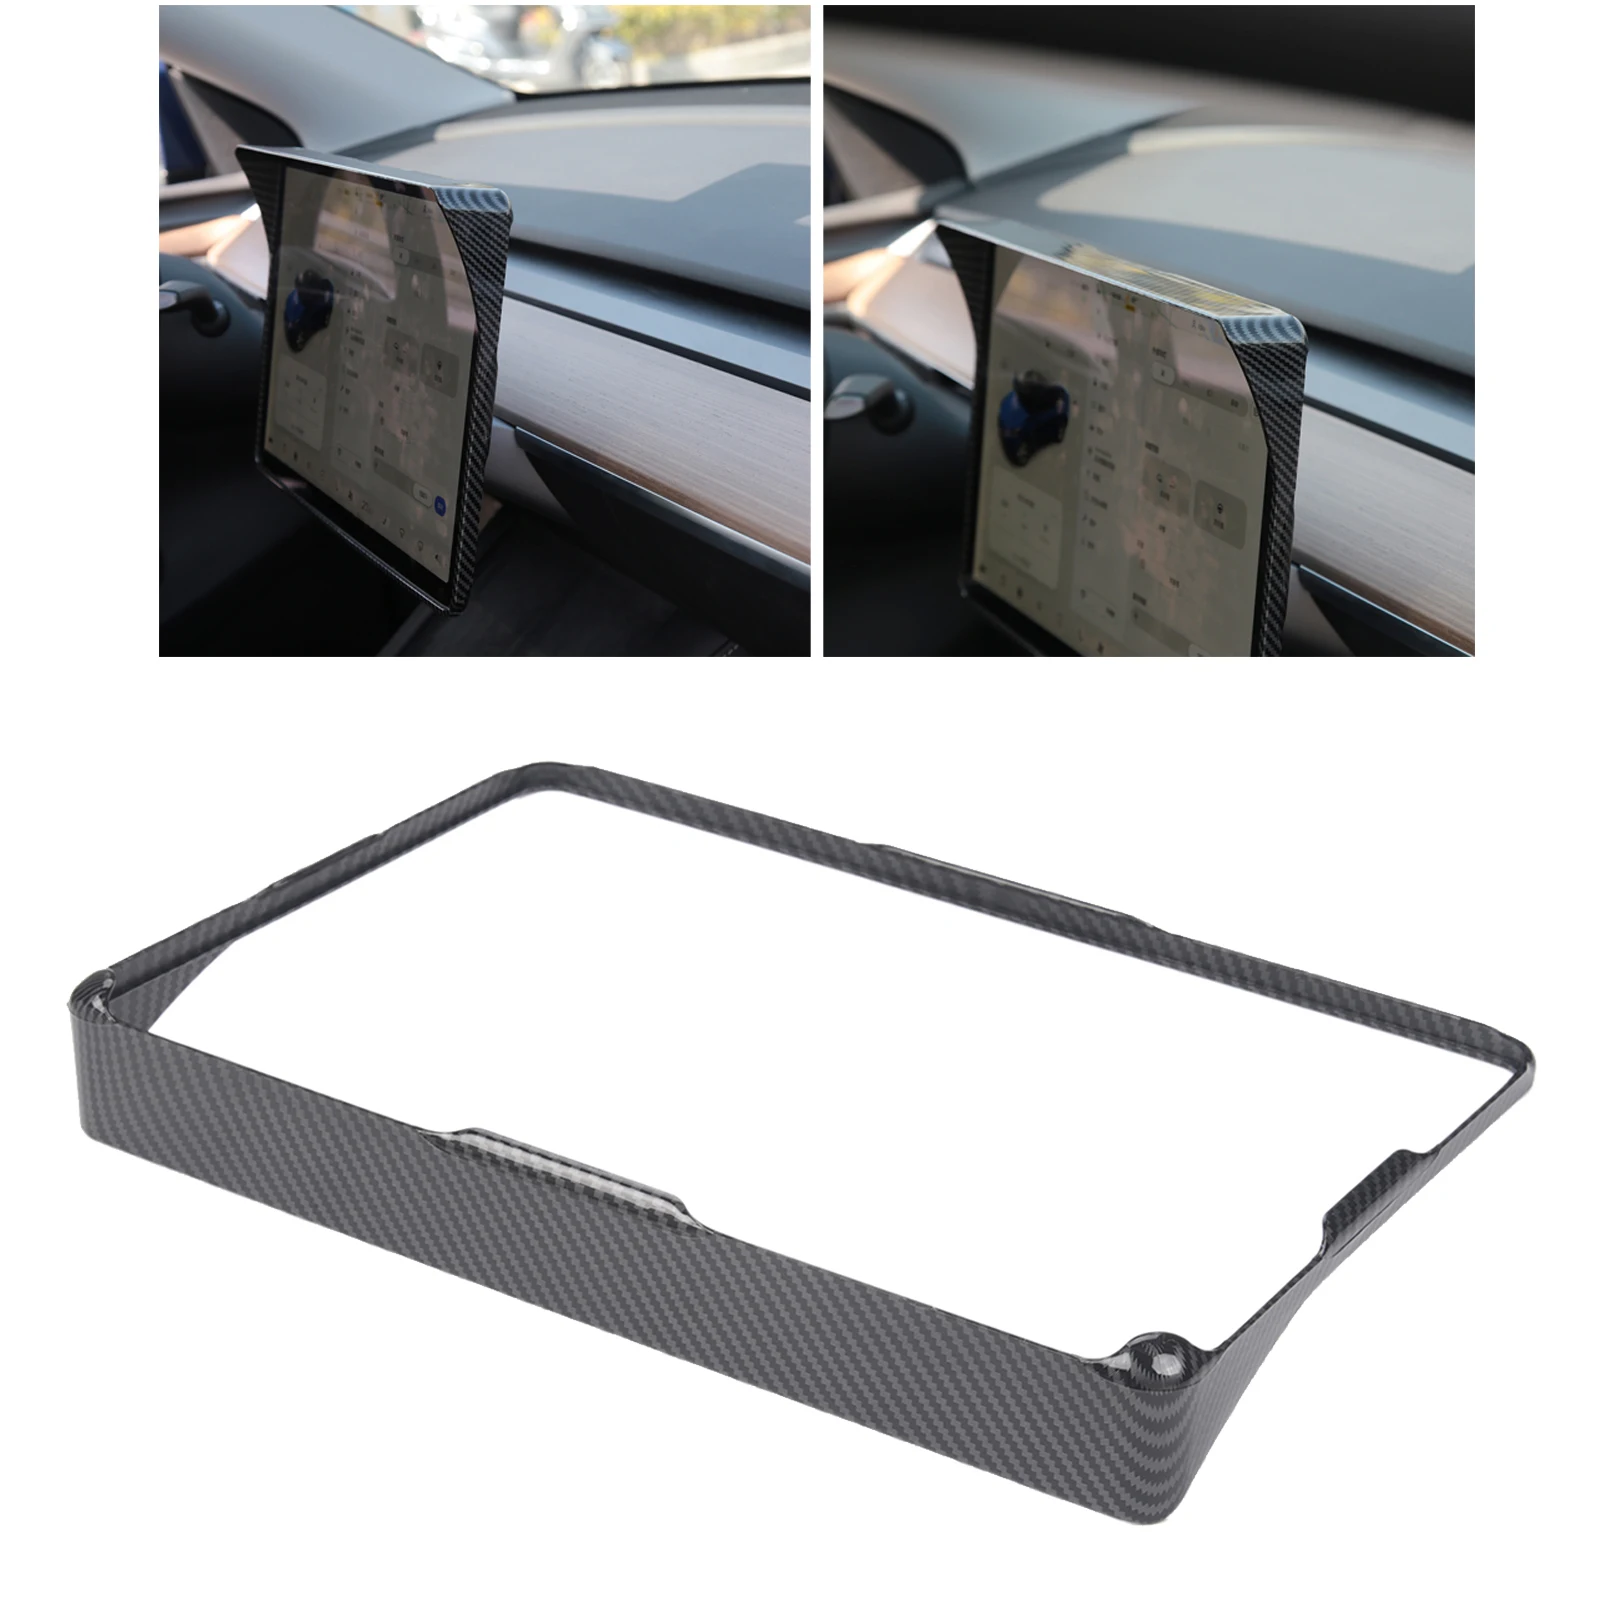 ABS Durable Interior Screen Protection Protector Sunshade Car Modification Accessories Supplies for Tesla Model 3 Y Touchscreen